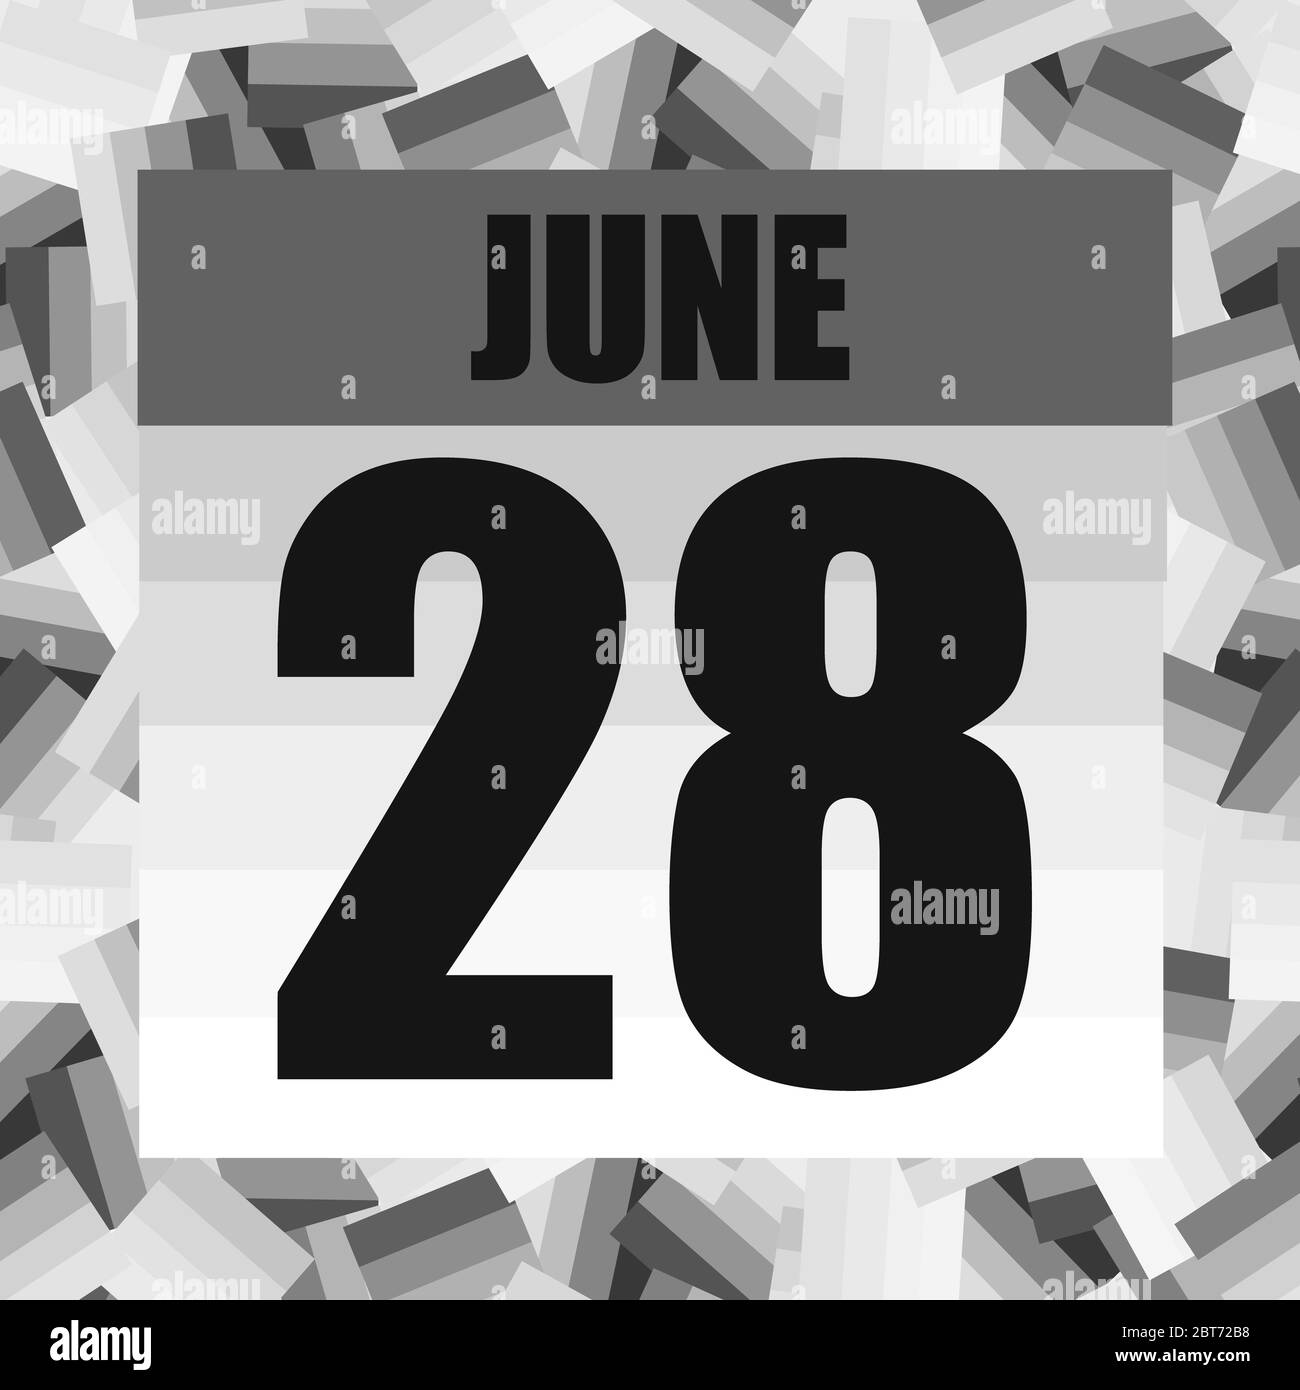 June 28 icon. For planning important day. Banner for holidays and special days. June 28th. Illustration. Stock Photo